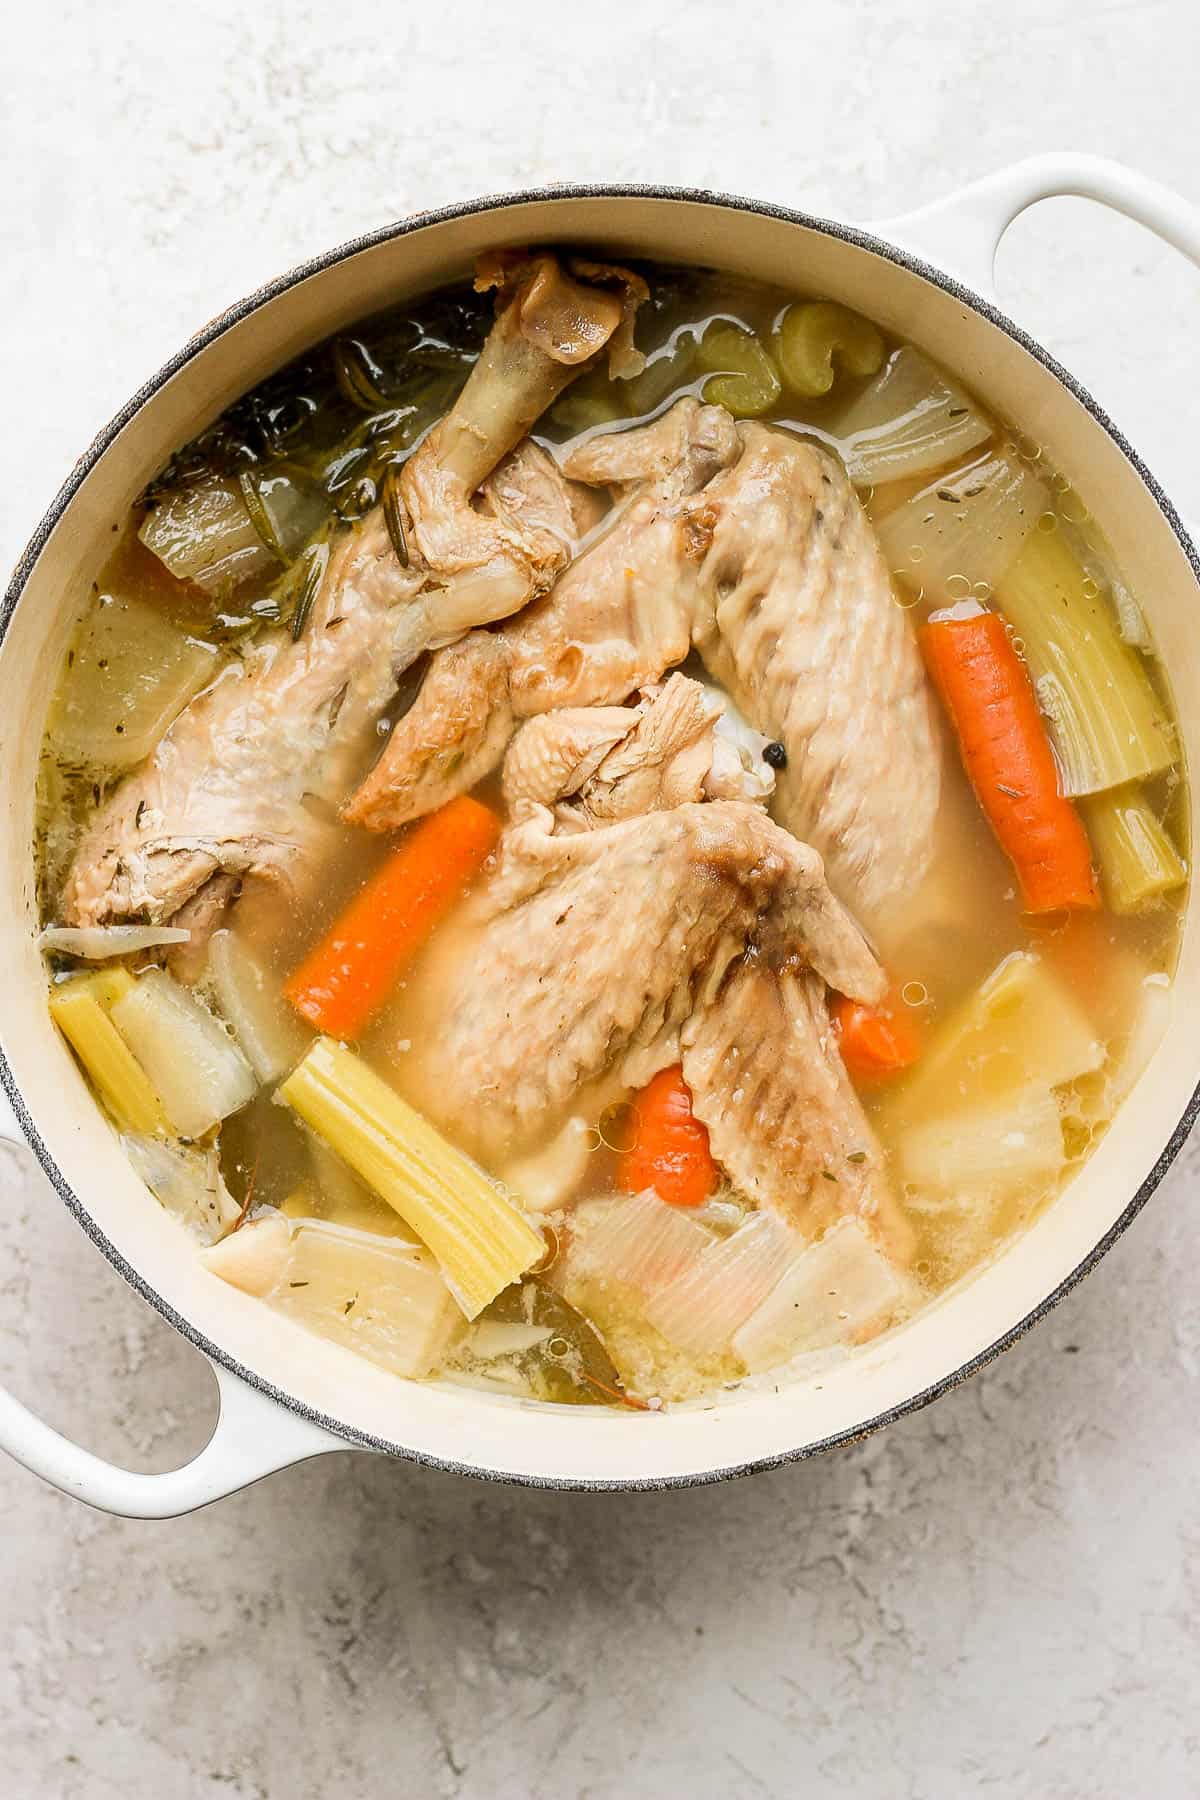 Fully cooked broth with all ingredients still in the pot.